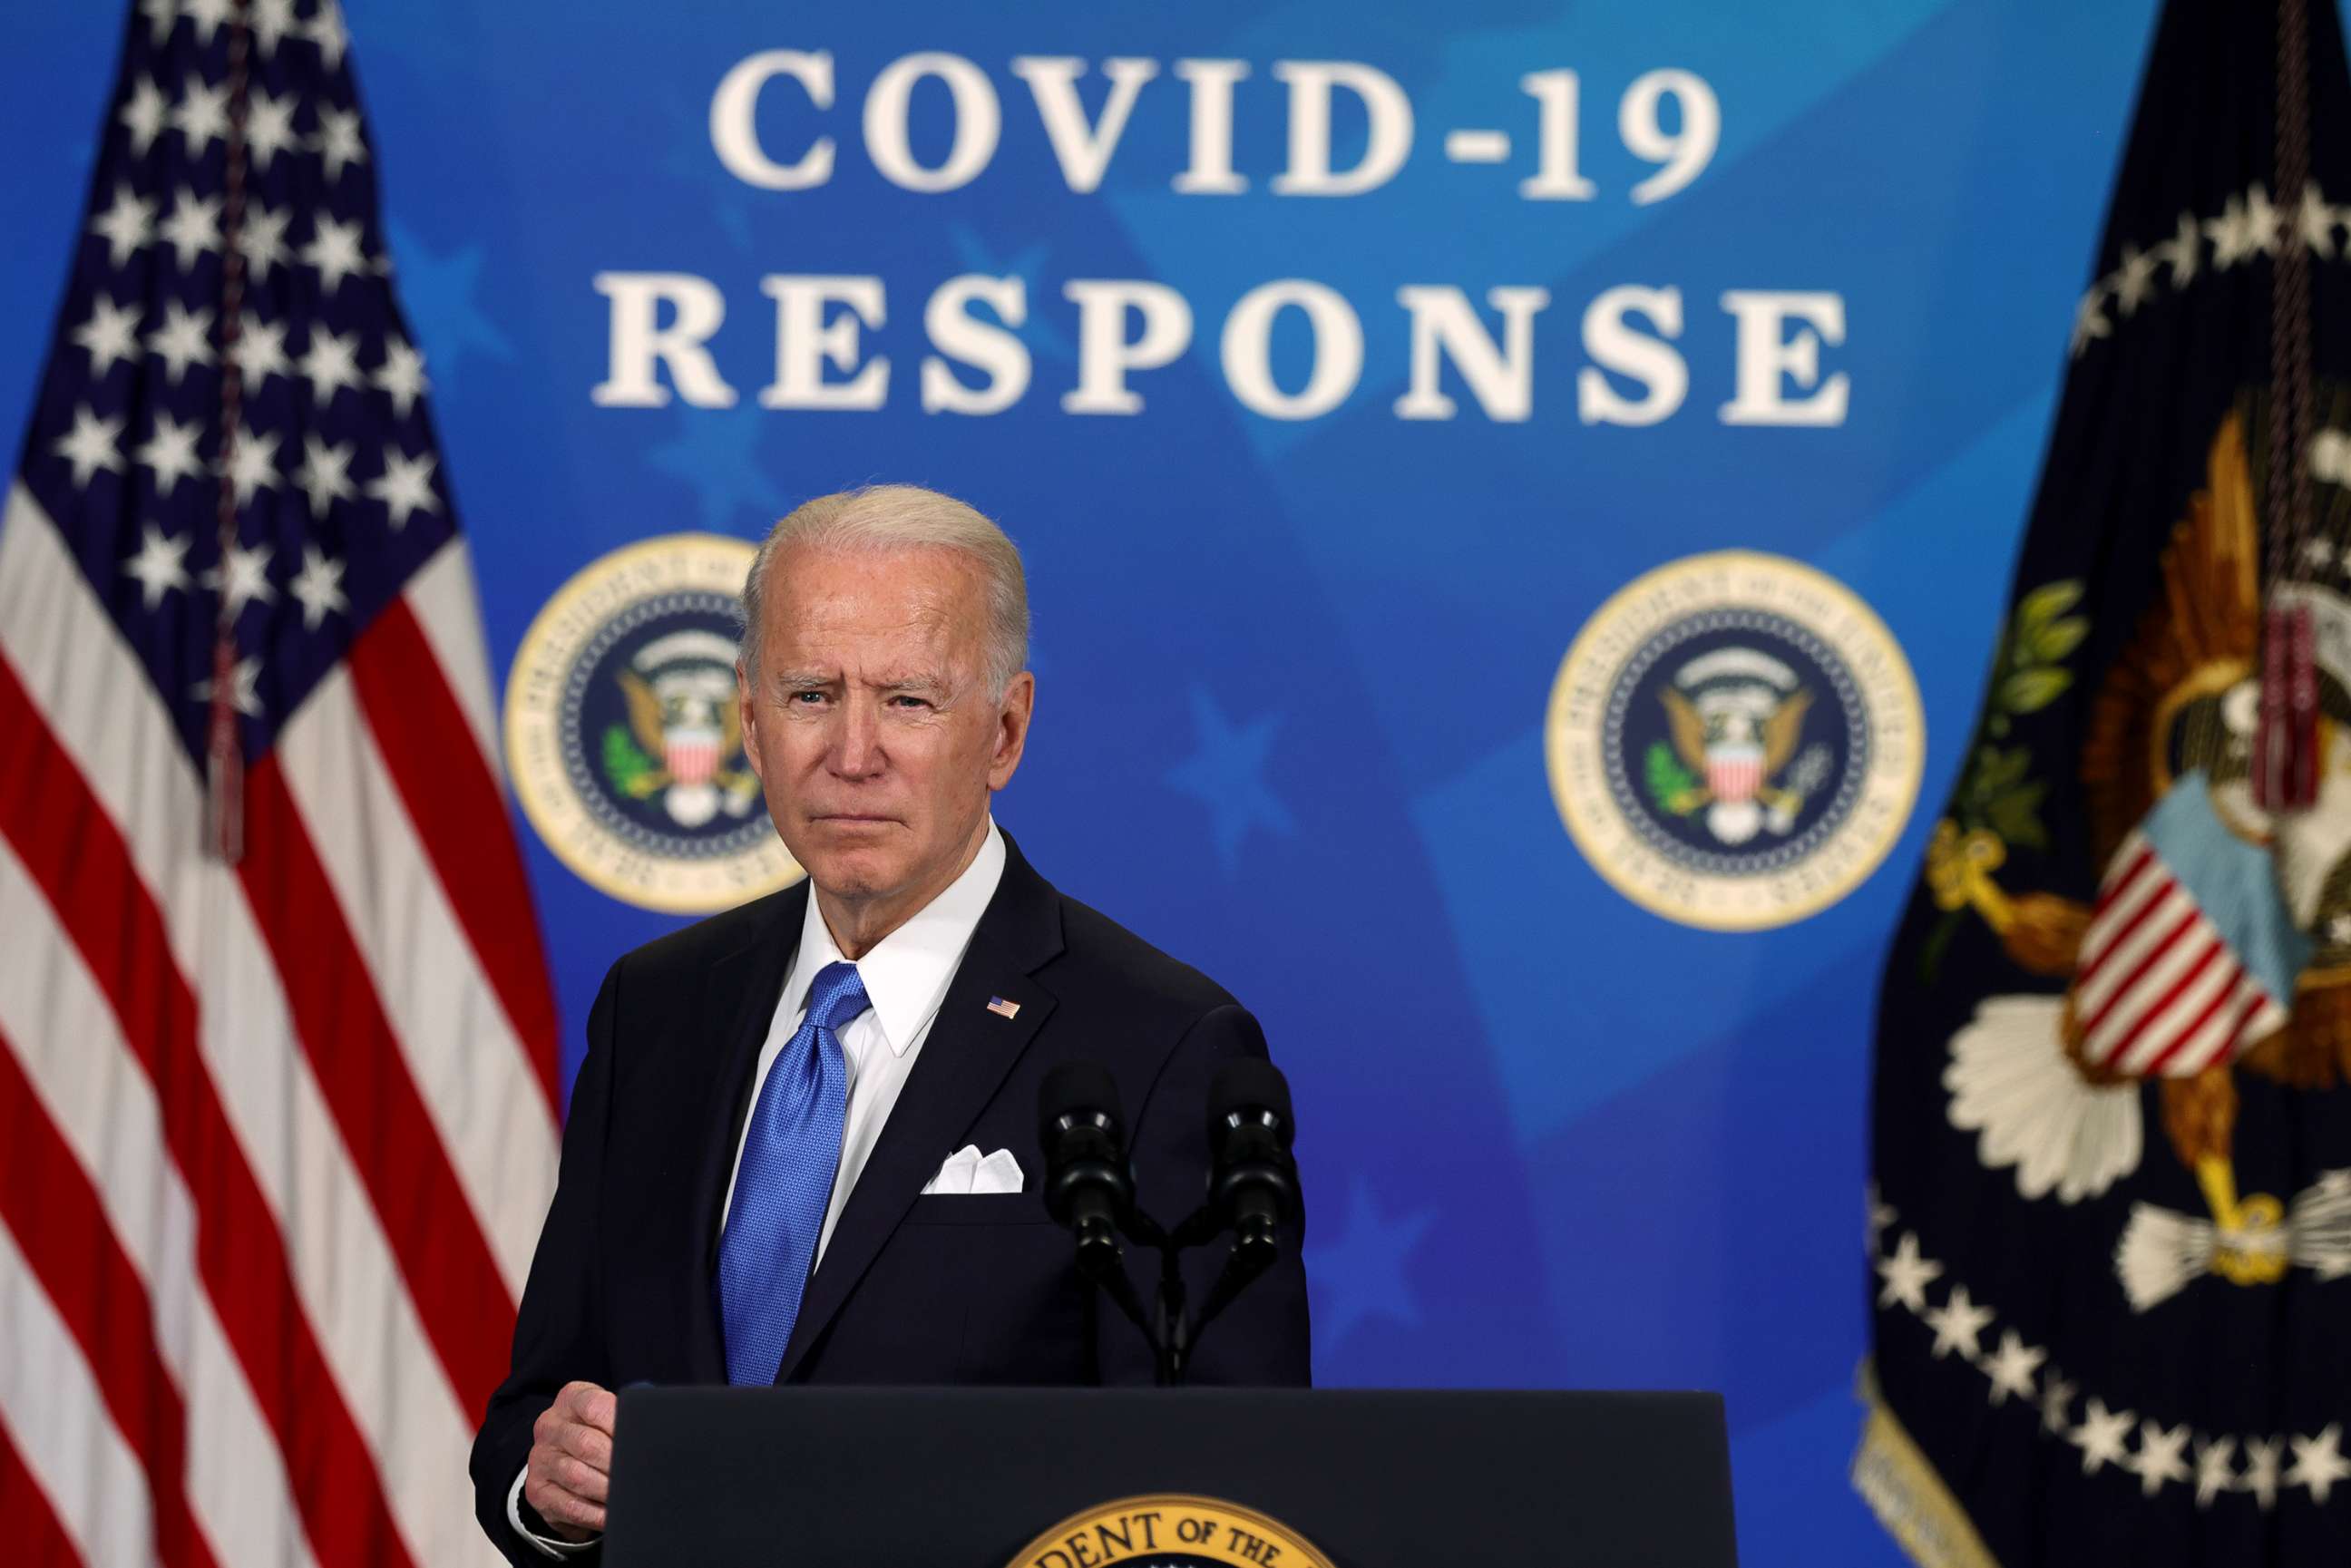 PHOTO: President Joe Biden speaks during an event in the South Court Auditorium of the Eisenhower Executive Office Building in Washington, March 10, 2021.